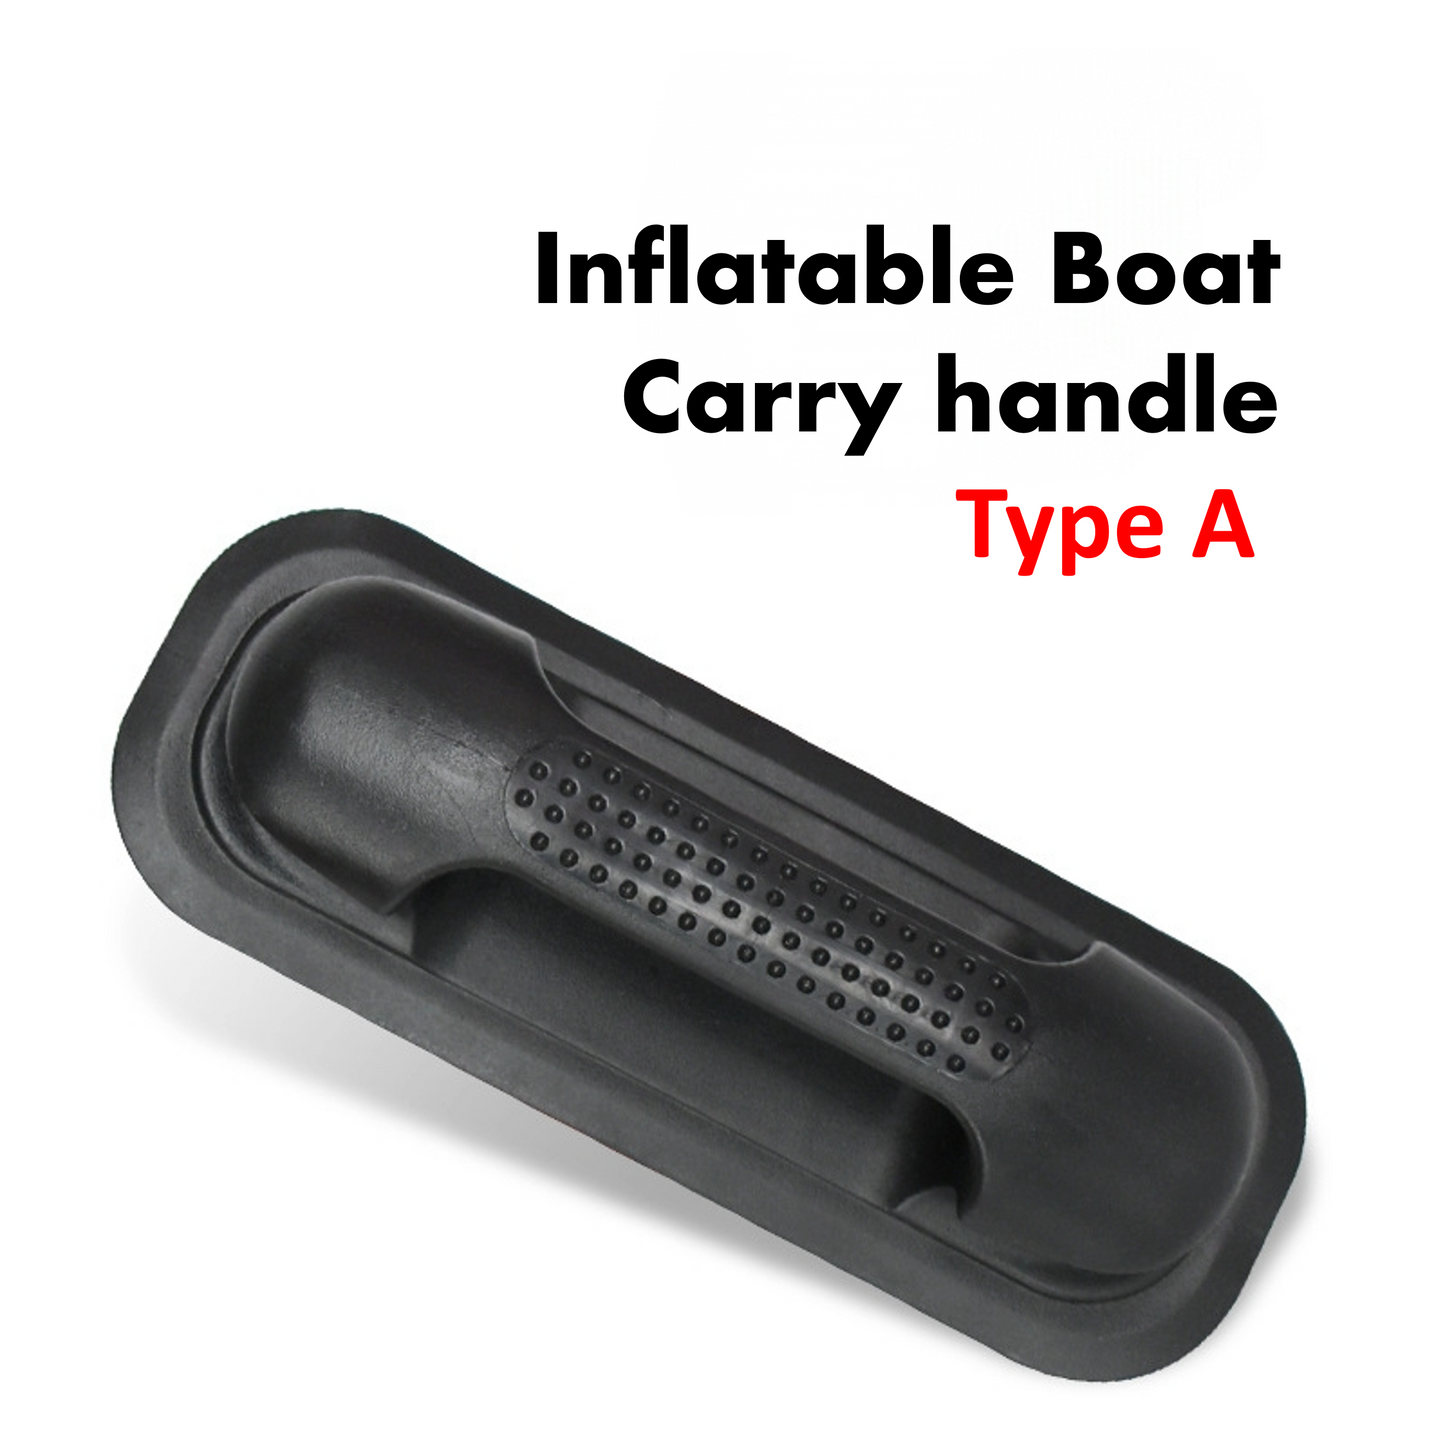 Inflatable Boat Carry handle